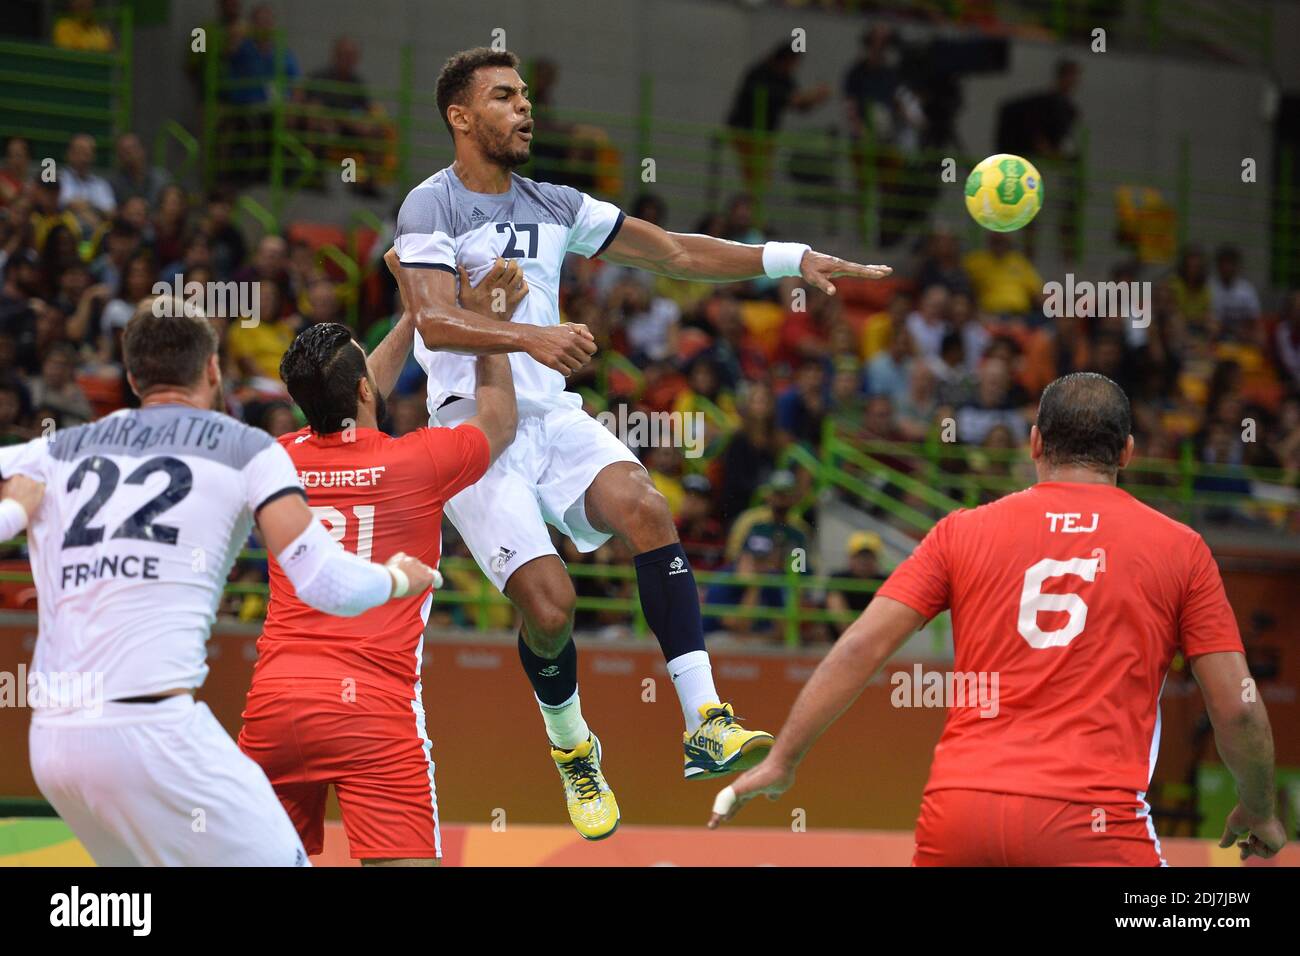 Adrien Dipanda in action during the France vs Tunisia handball game at the 2016 Rio Olympic Games on August 7, 2016 in Rio De Janeiro, Brazil. Photo by Lionel Hahn/ABACAPRESS.COM Stock Photo